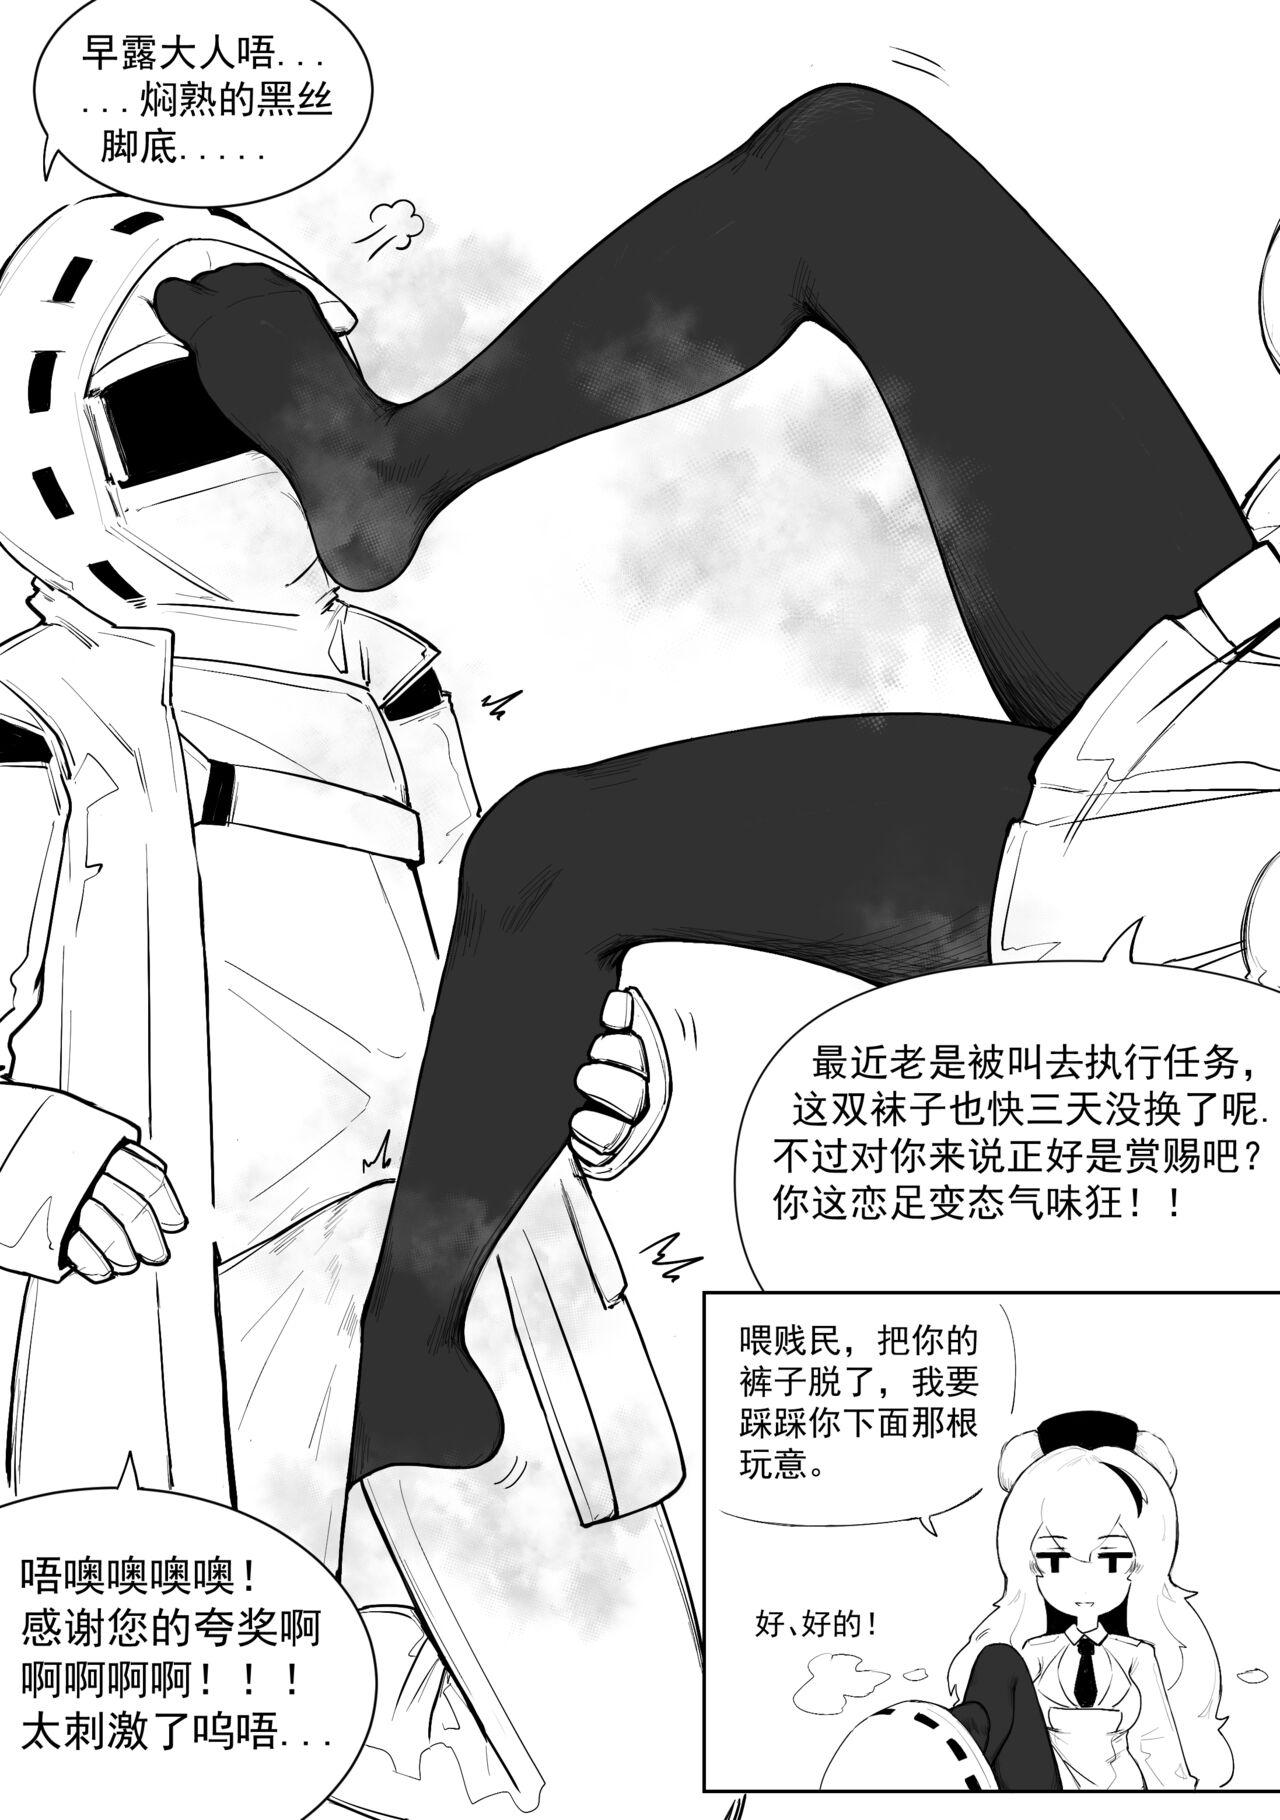 Bokep 澄澈之冰 早露 - Arknights Analfucking - Page 3